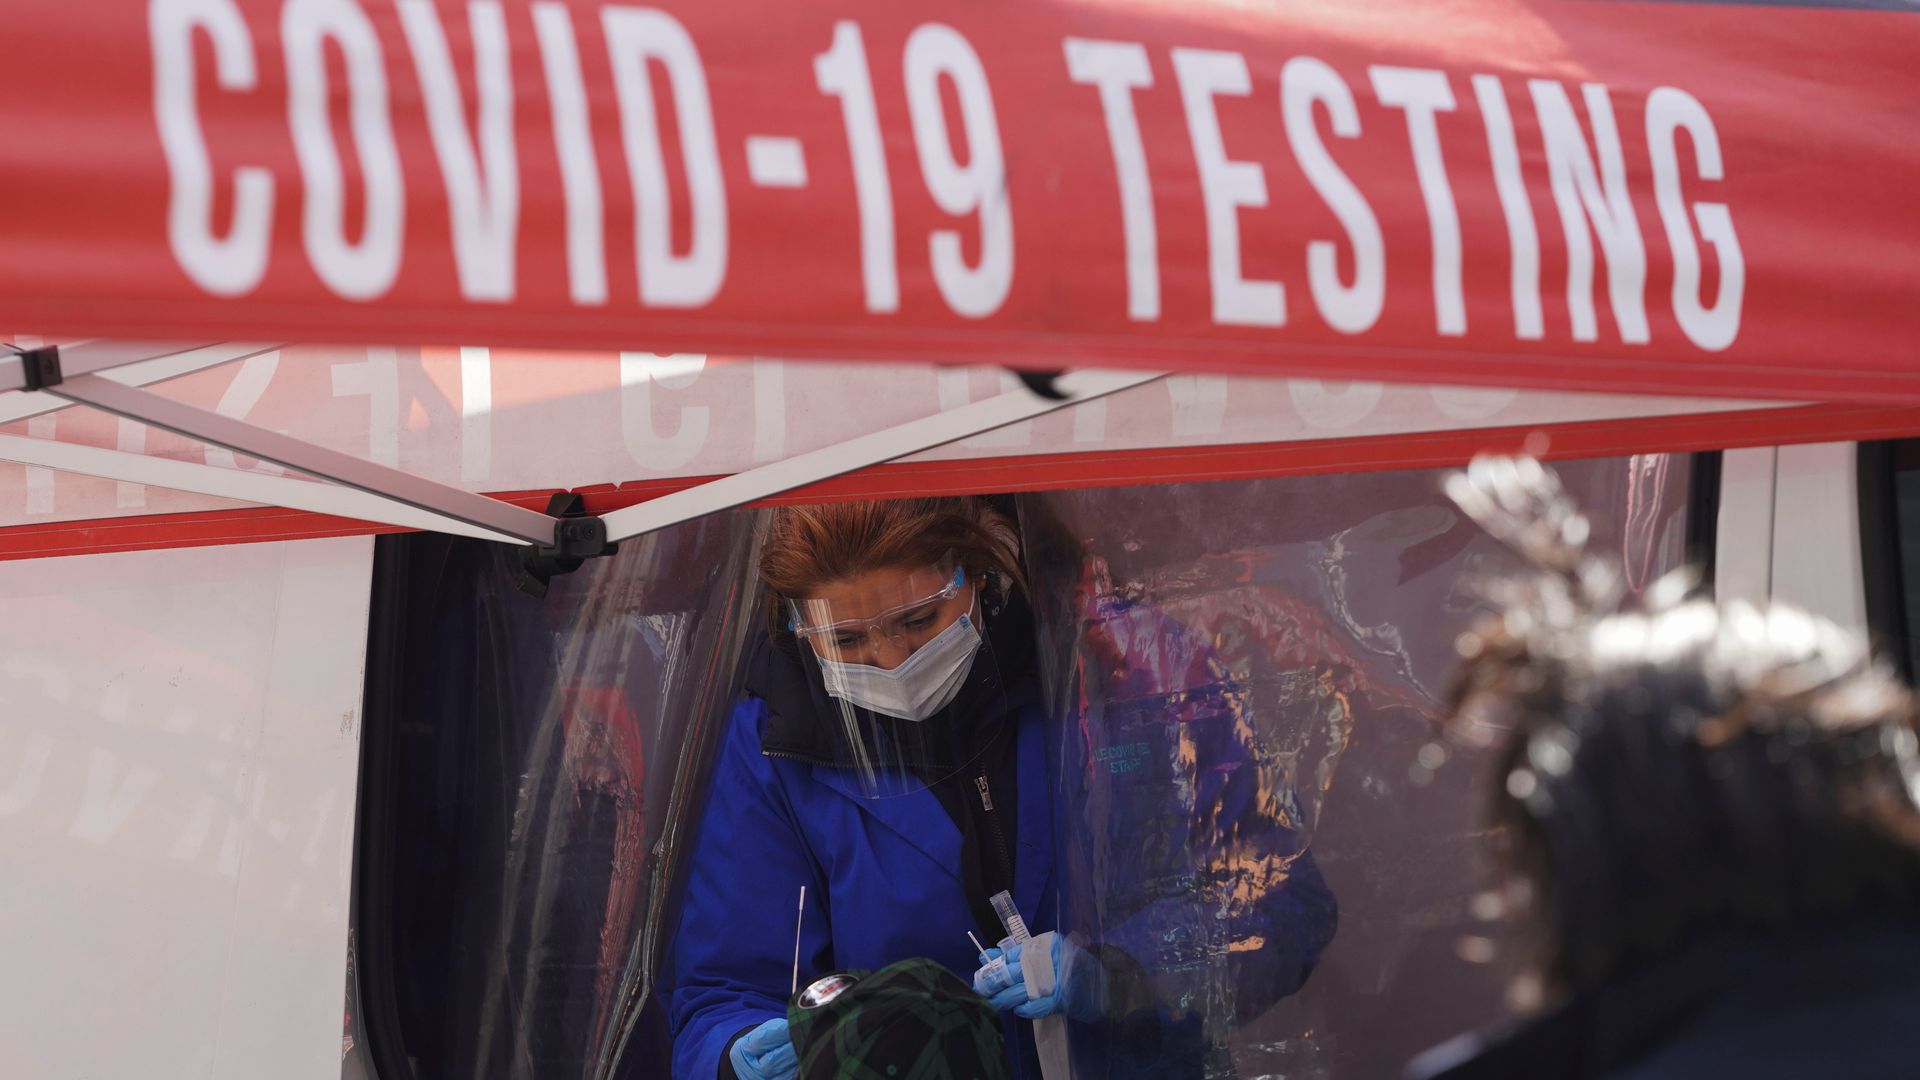 Photo of a worker swabbing a person's nose under a red COVID-19 testing tent